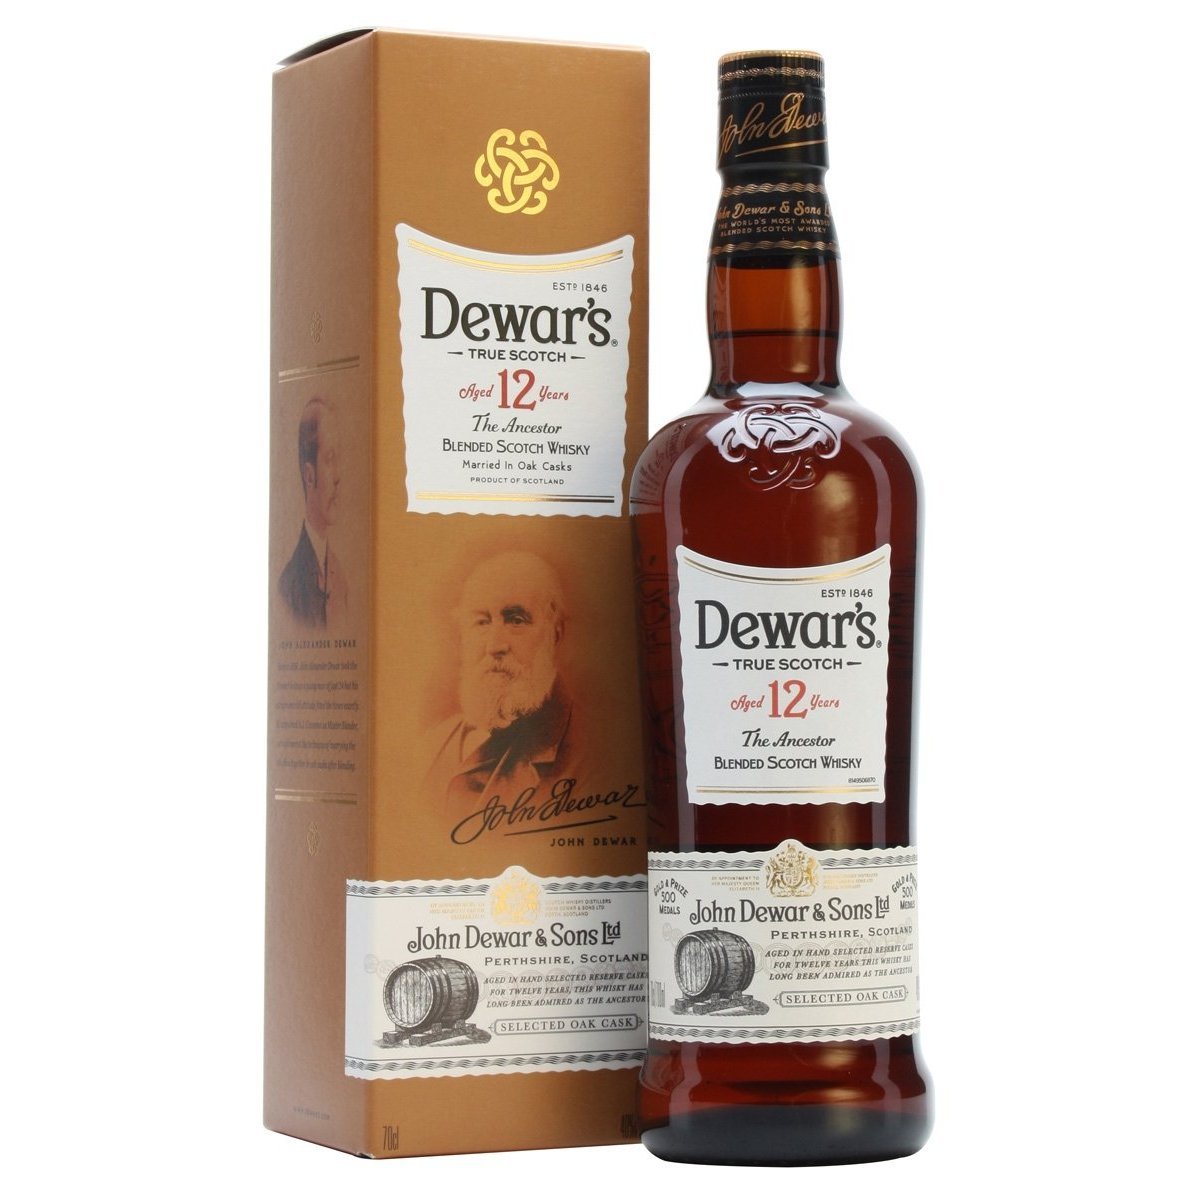 Dewar's 12 Years Old The Ancestor Blended Scotch Whisky 40% Vol. 0,7l in Giftbox